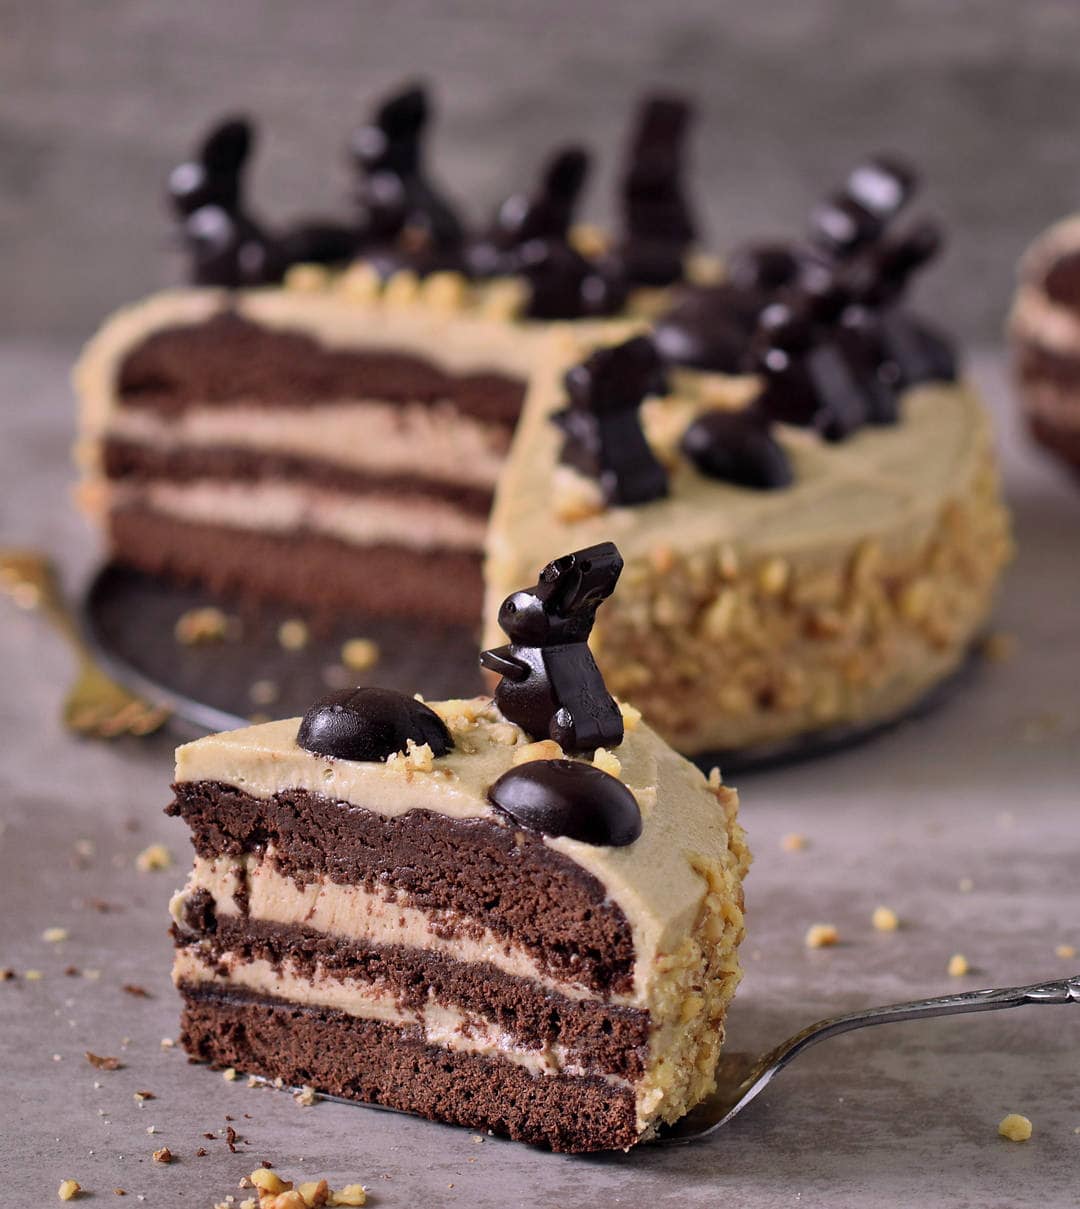 Peanut butter chocolate cake with a piece cut out